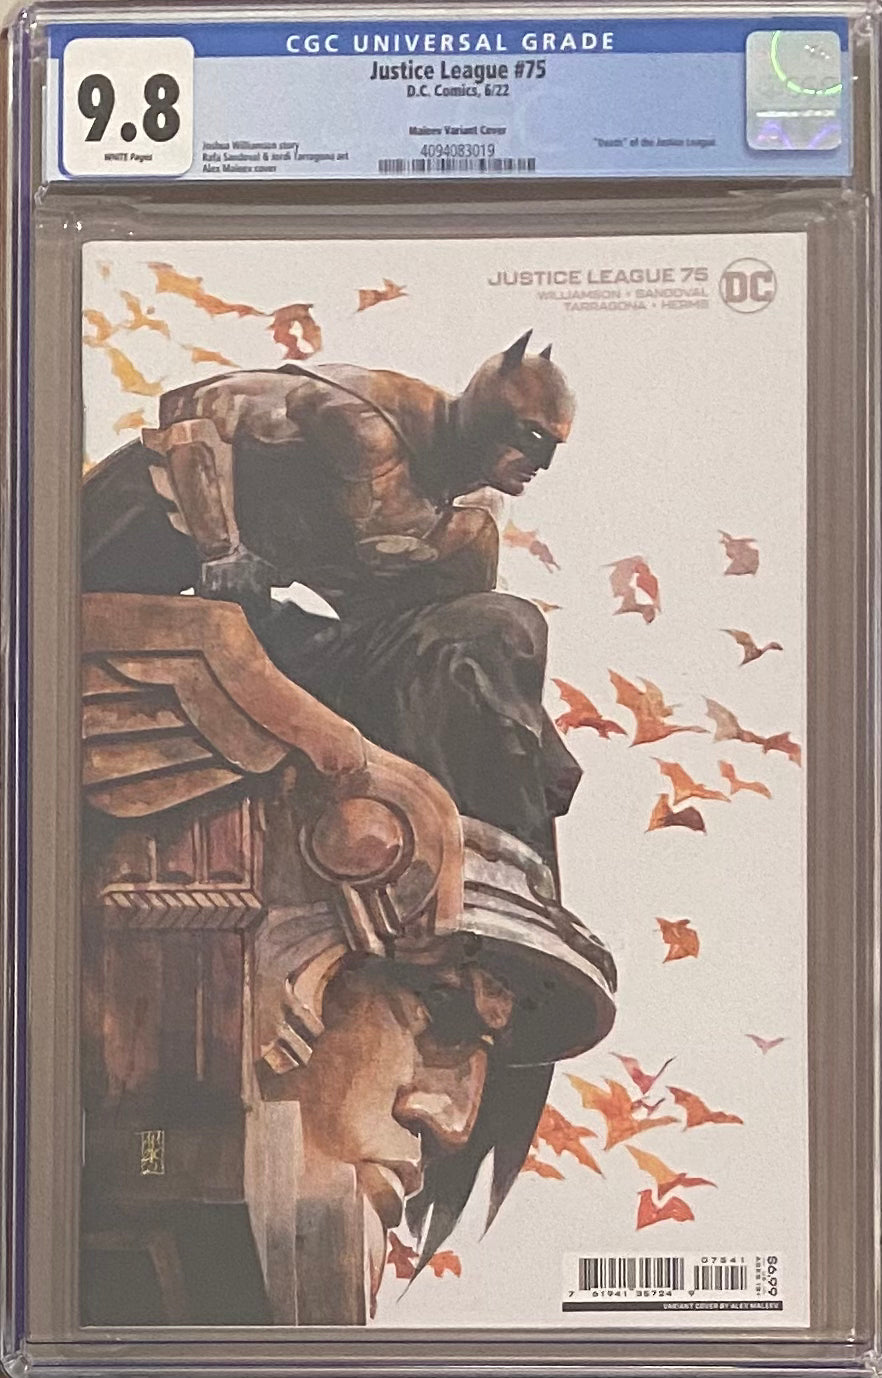 Justice League #75 Maleev Variant CGC 9.8 - Death of Justice League